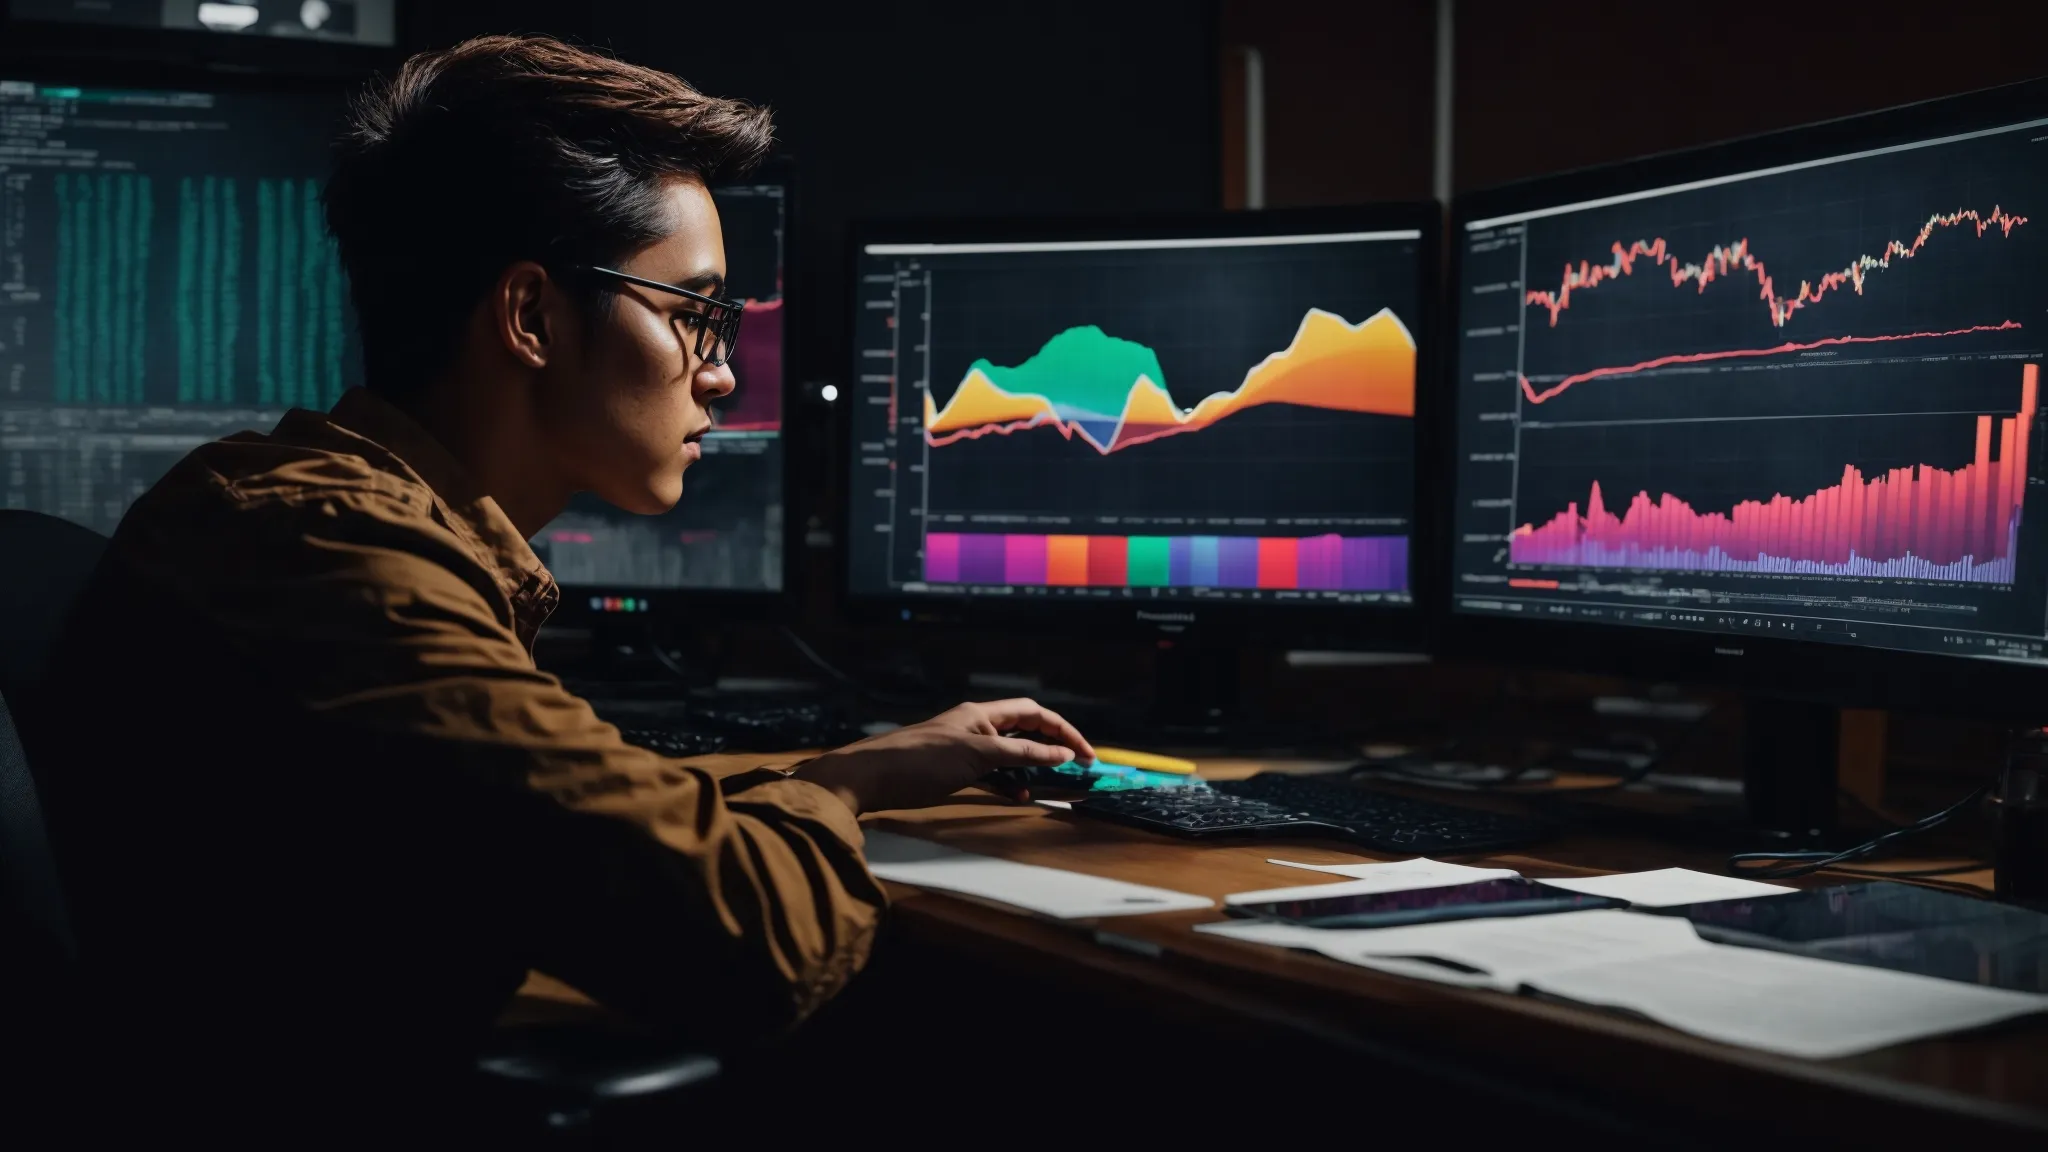 a focused individual analyzing colorful charts and graphs on a computer screen, indicating seo performance metrics.